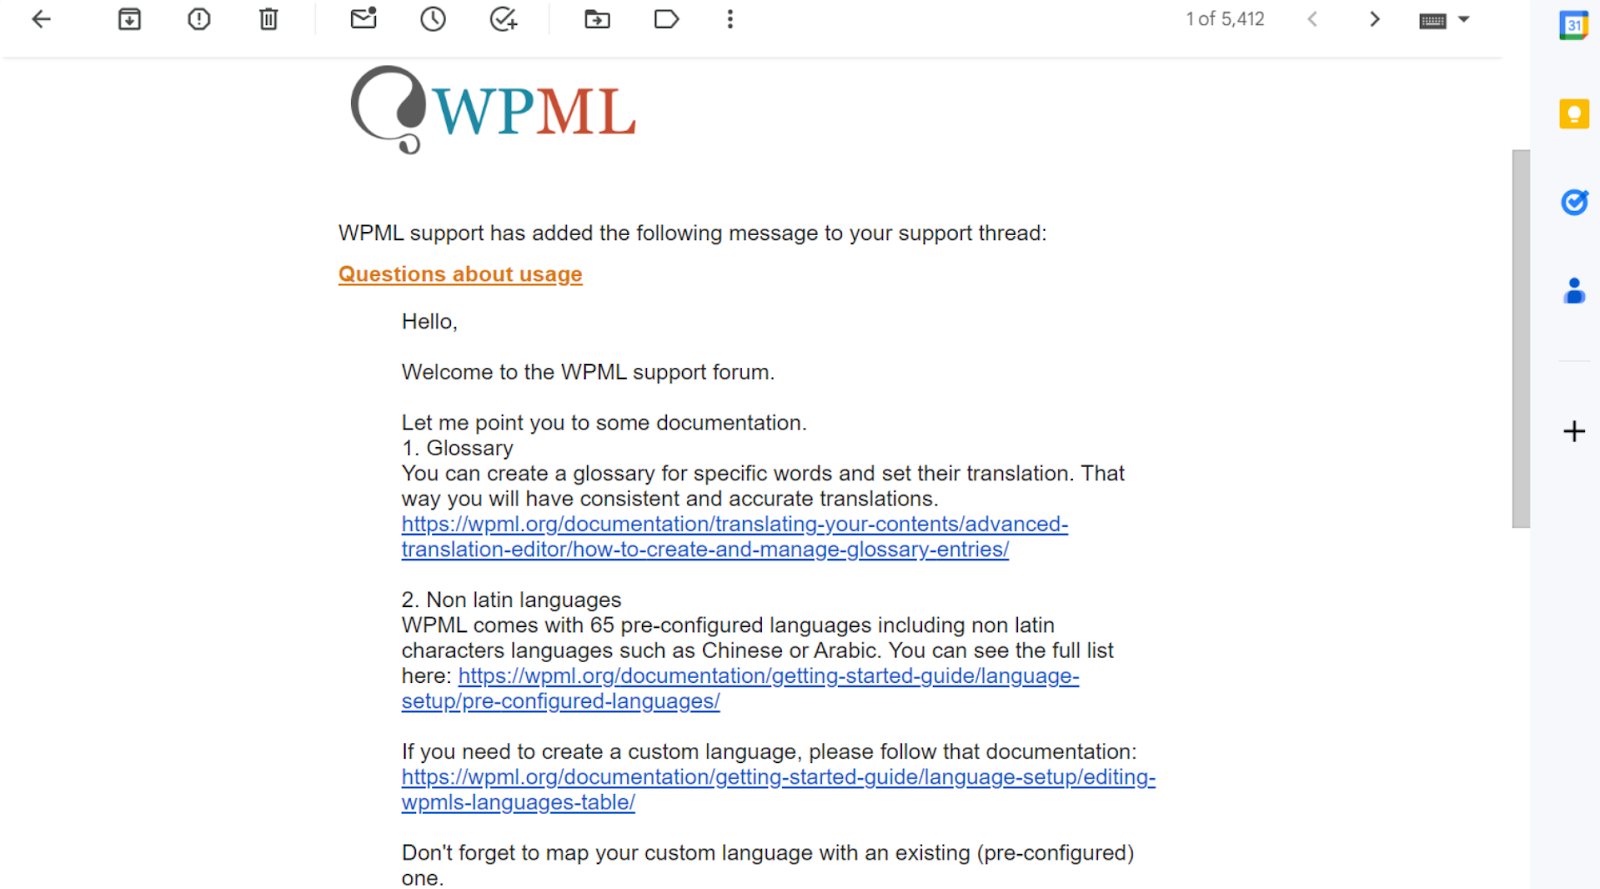 WPML support email